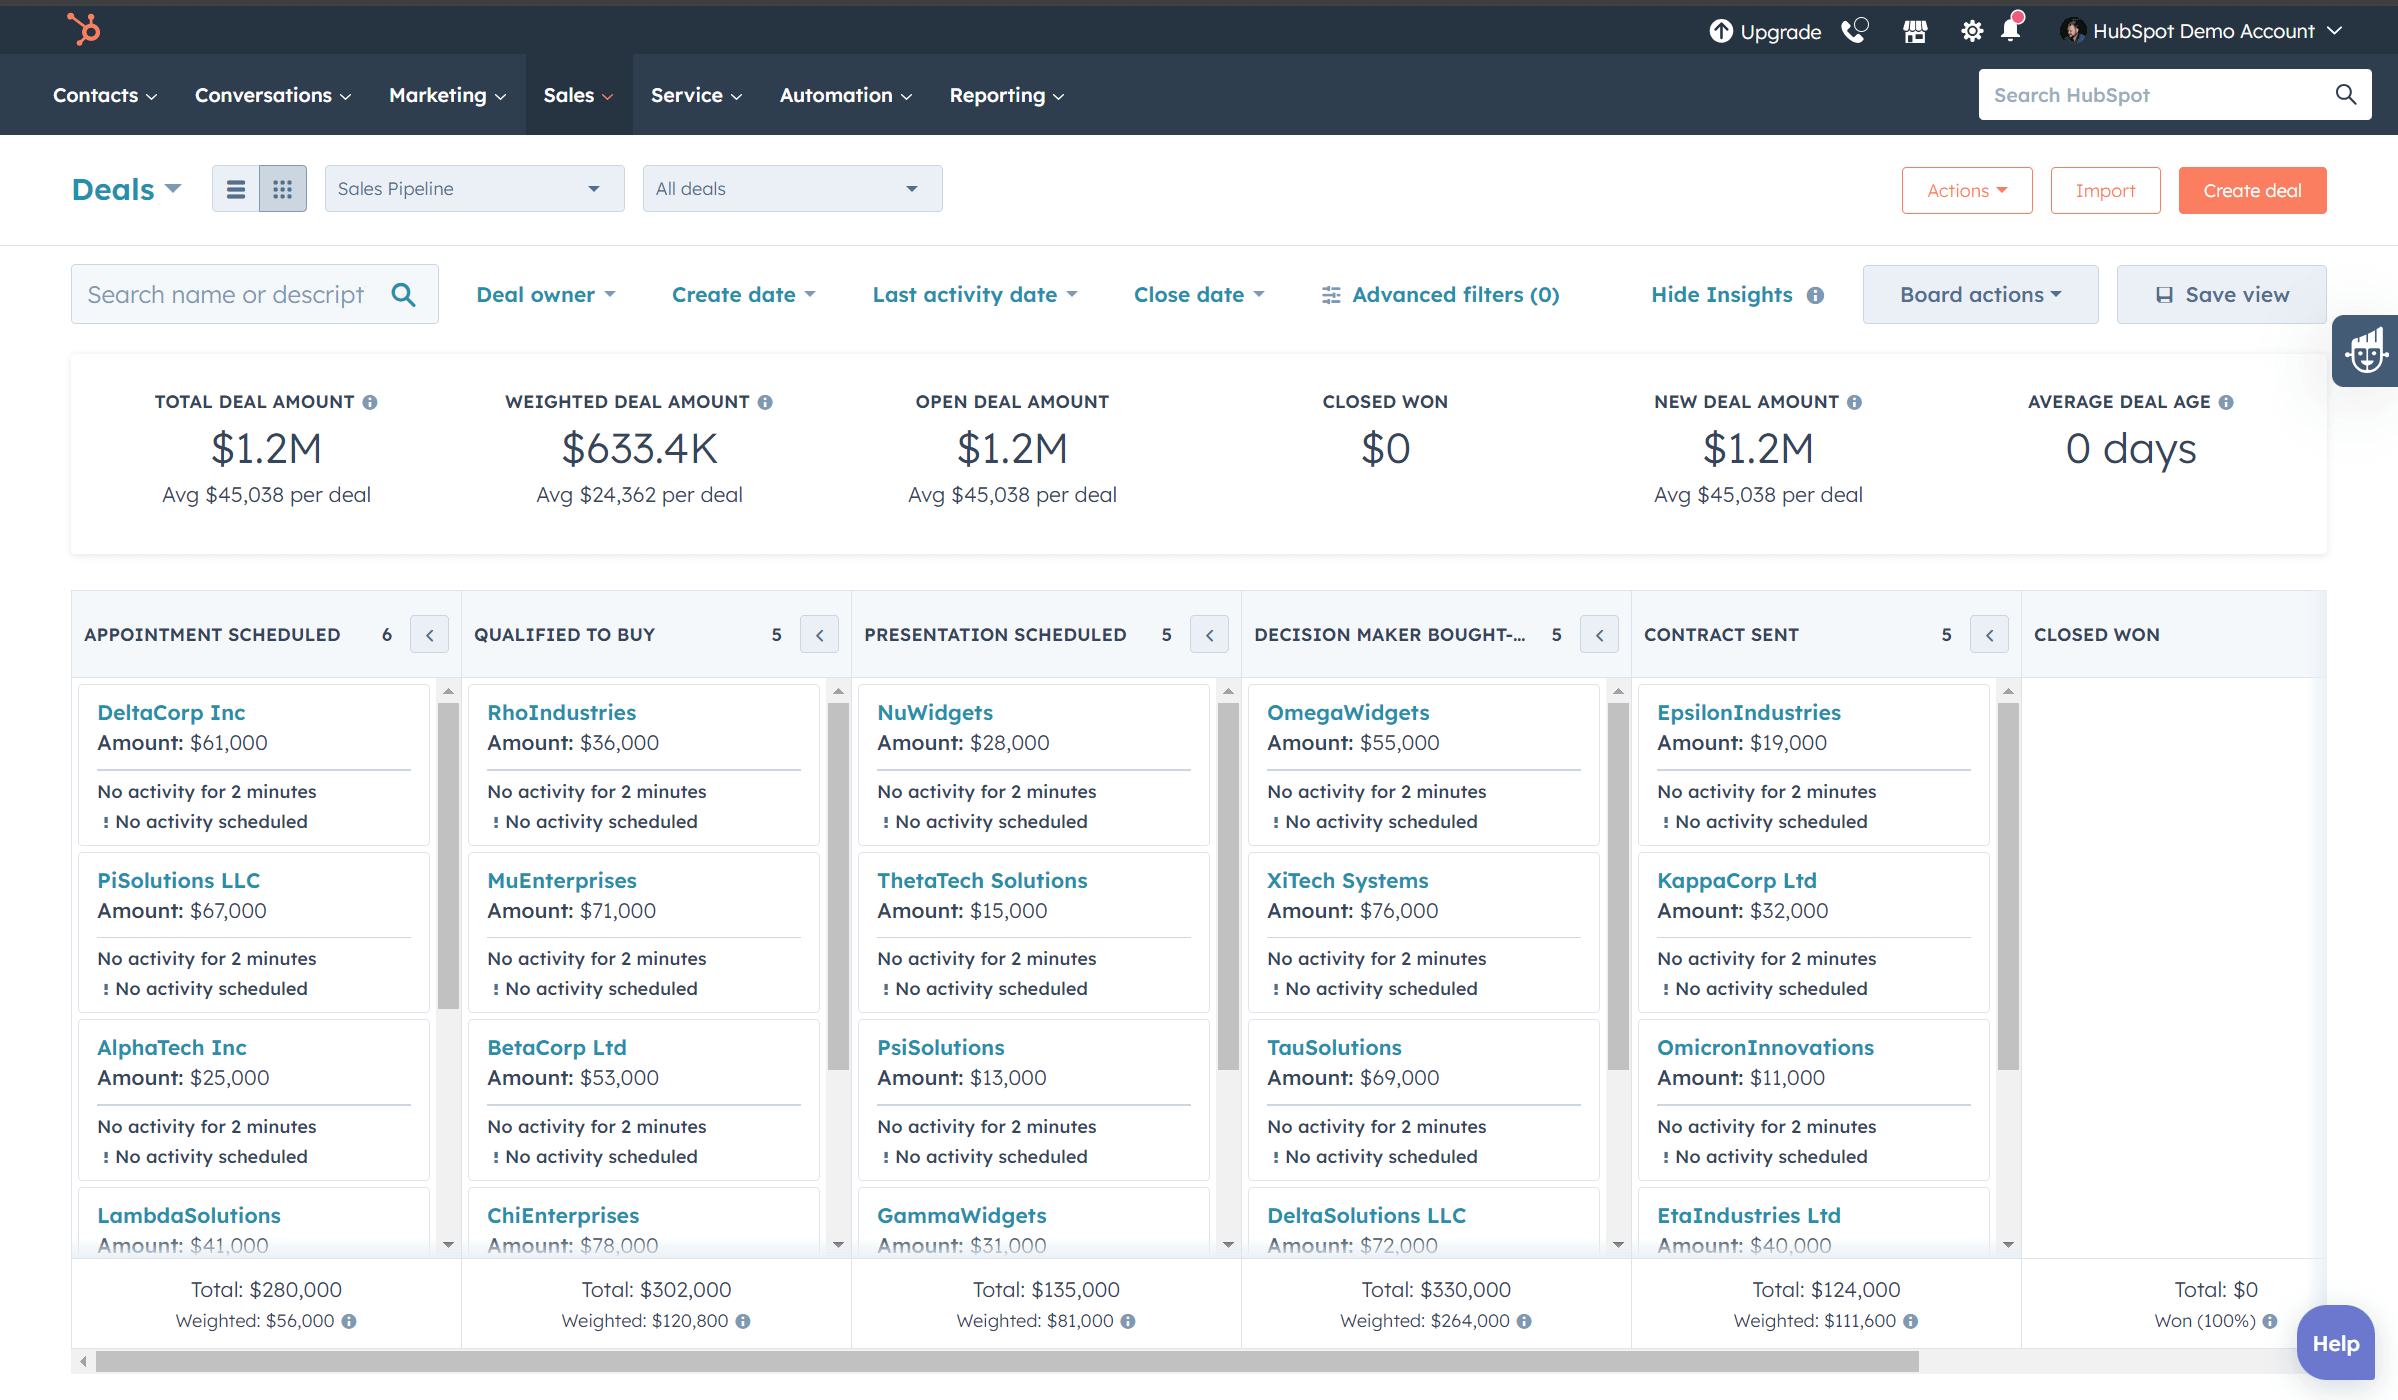 HubSpot Deals dashboard showing an overview of sales operations, with detailed metrics on deal amounts, stages, and activities, essential for managing and tracking the sales pipeline effectively.